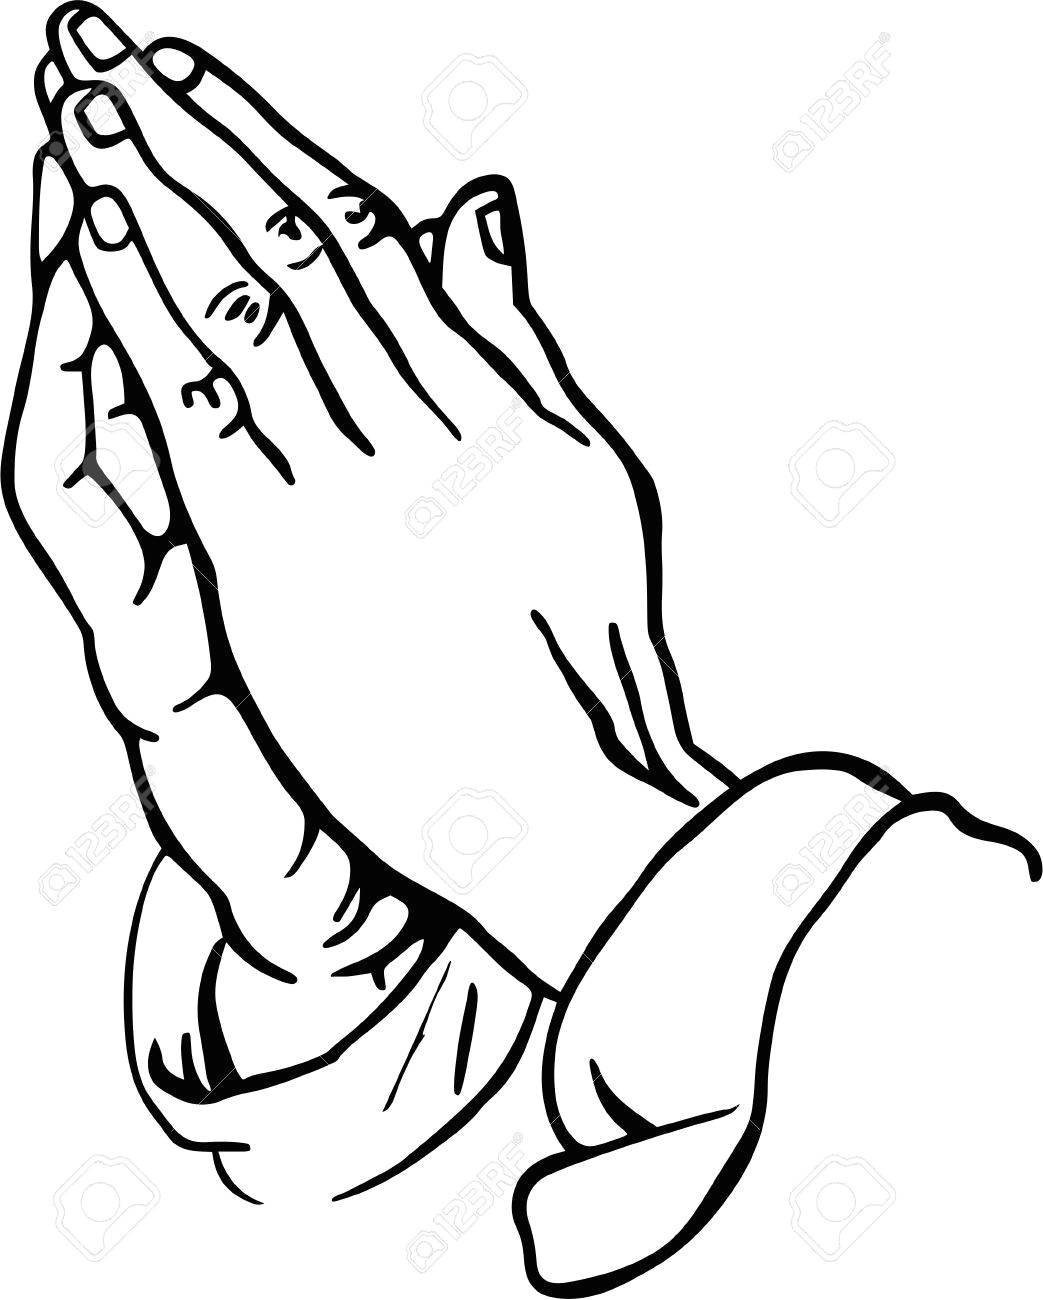 Drawing Of Joining Hands for Prayer Praying Hands Clipart Craft Ideas Pinterest Praying Hands